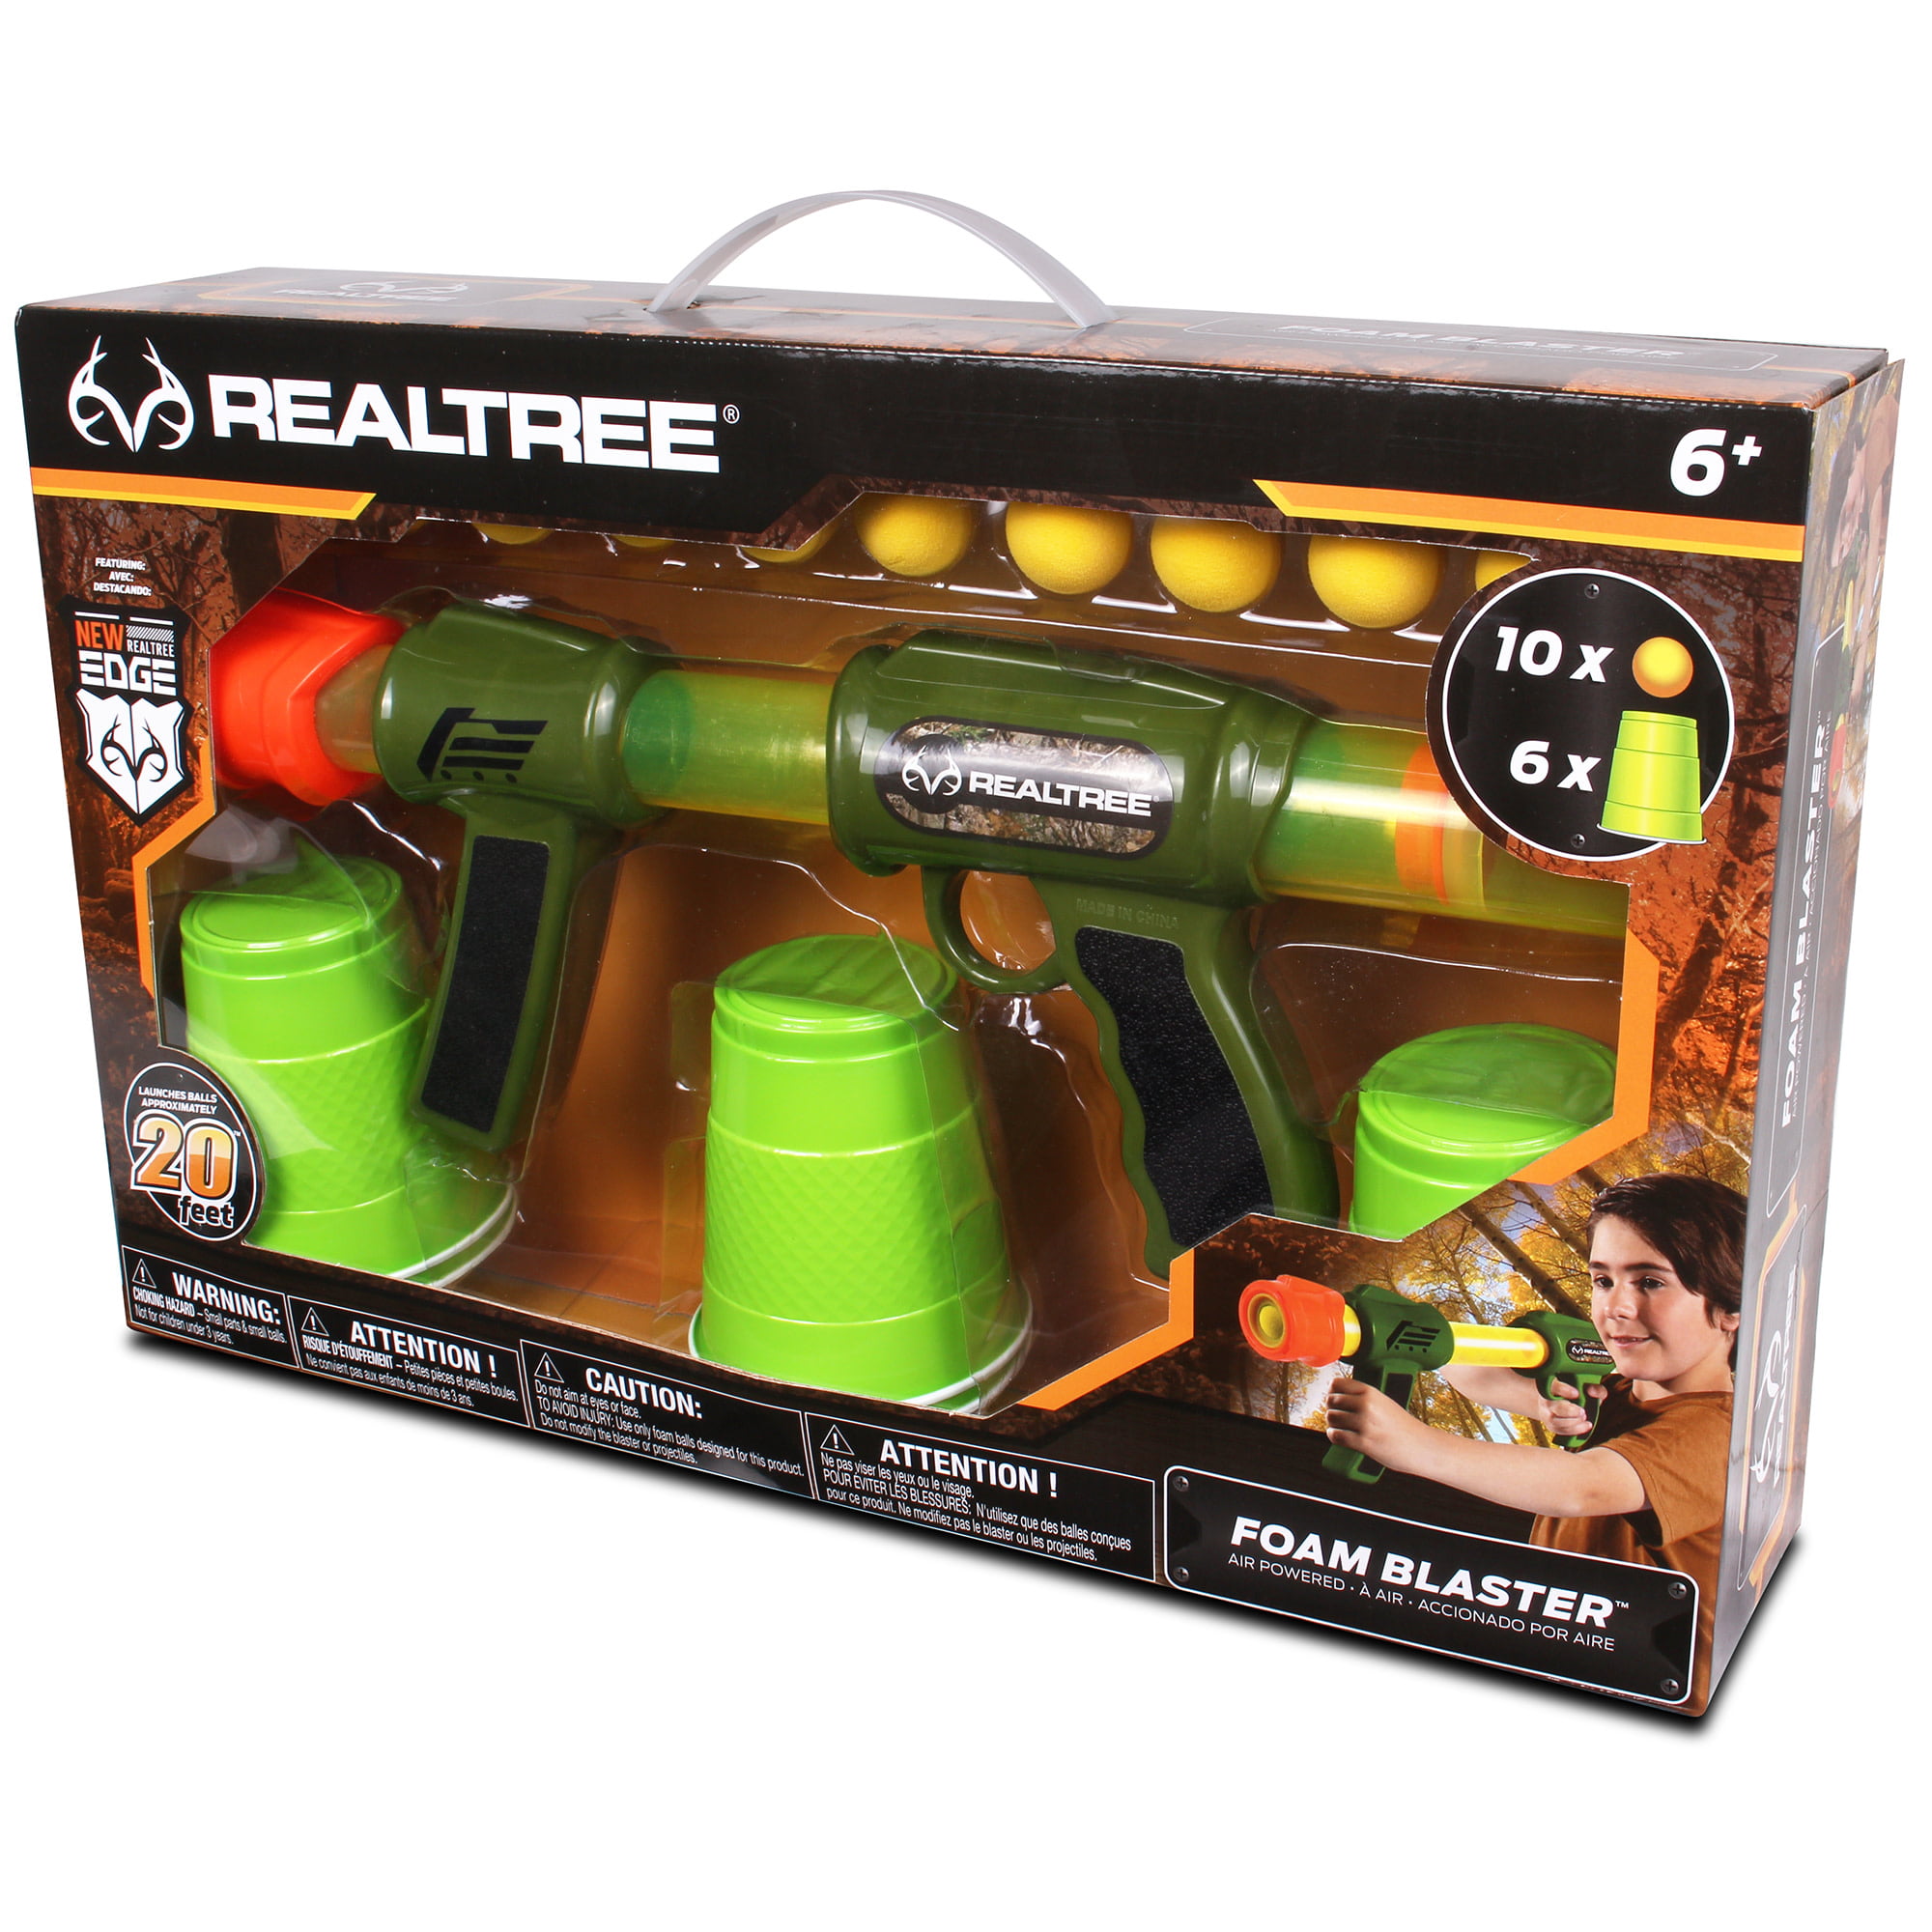 RealTree: Foam Blaster Set - NKOK, Pump Action Launches Foam Balls,  Includes 10 Foam Balls, 6 Cups For Targets, Ages 6+ 